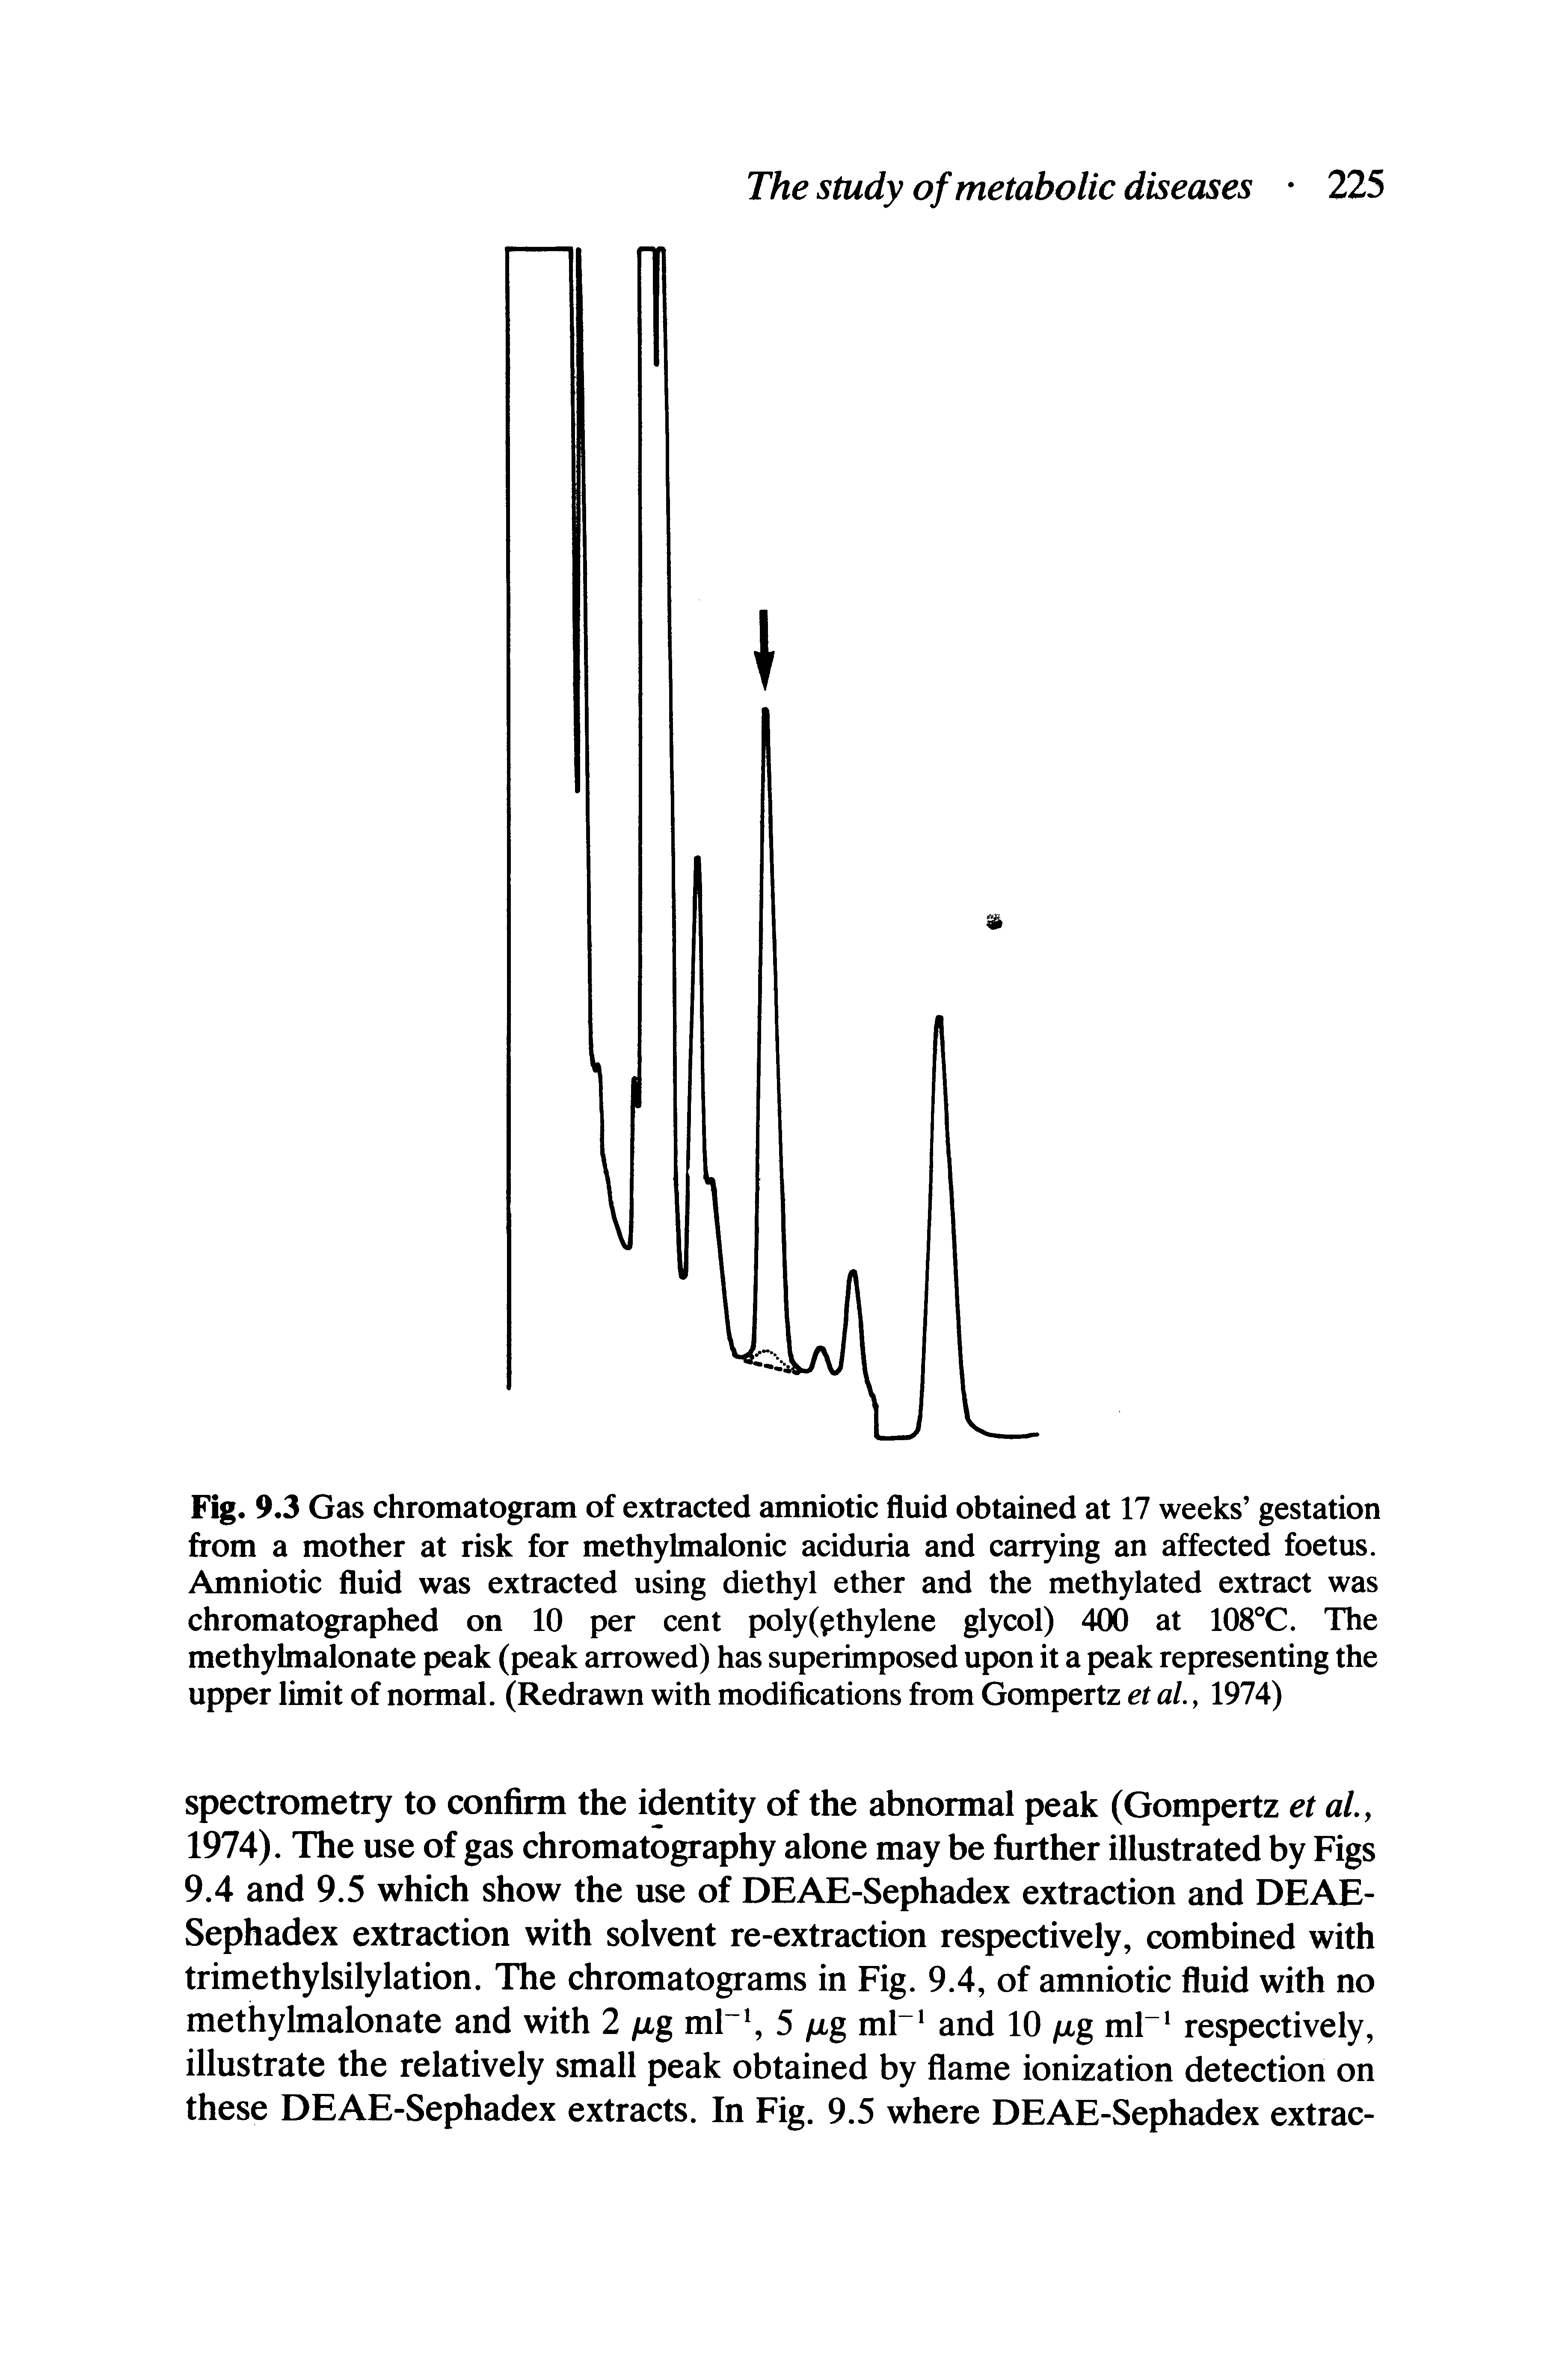 Fig. 9.3 Gas chromatogram of extracted amniotic fluid obtained at 17 weeks gestation from a mother at risk for methylmalonic aciduria and carrying an affected foetus. Amniotic fluid was extracted using diethyl ether and the methylated extract was chromatographed on 10 per cent poly(pthylene glycol) 400 at 108 C. The methylmalonate peak (peak arrowed) has superimposed upon it a peak representing the upper limit of normal. (Redrawn with modifications from Gompertz et al., 1974)...